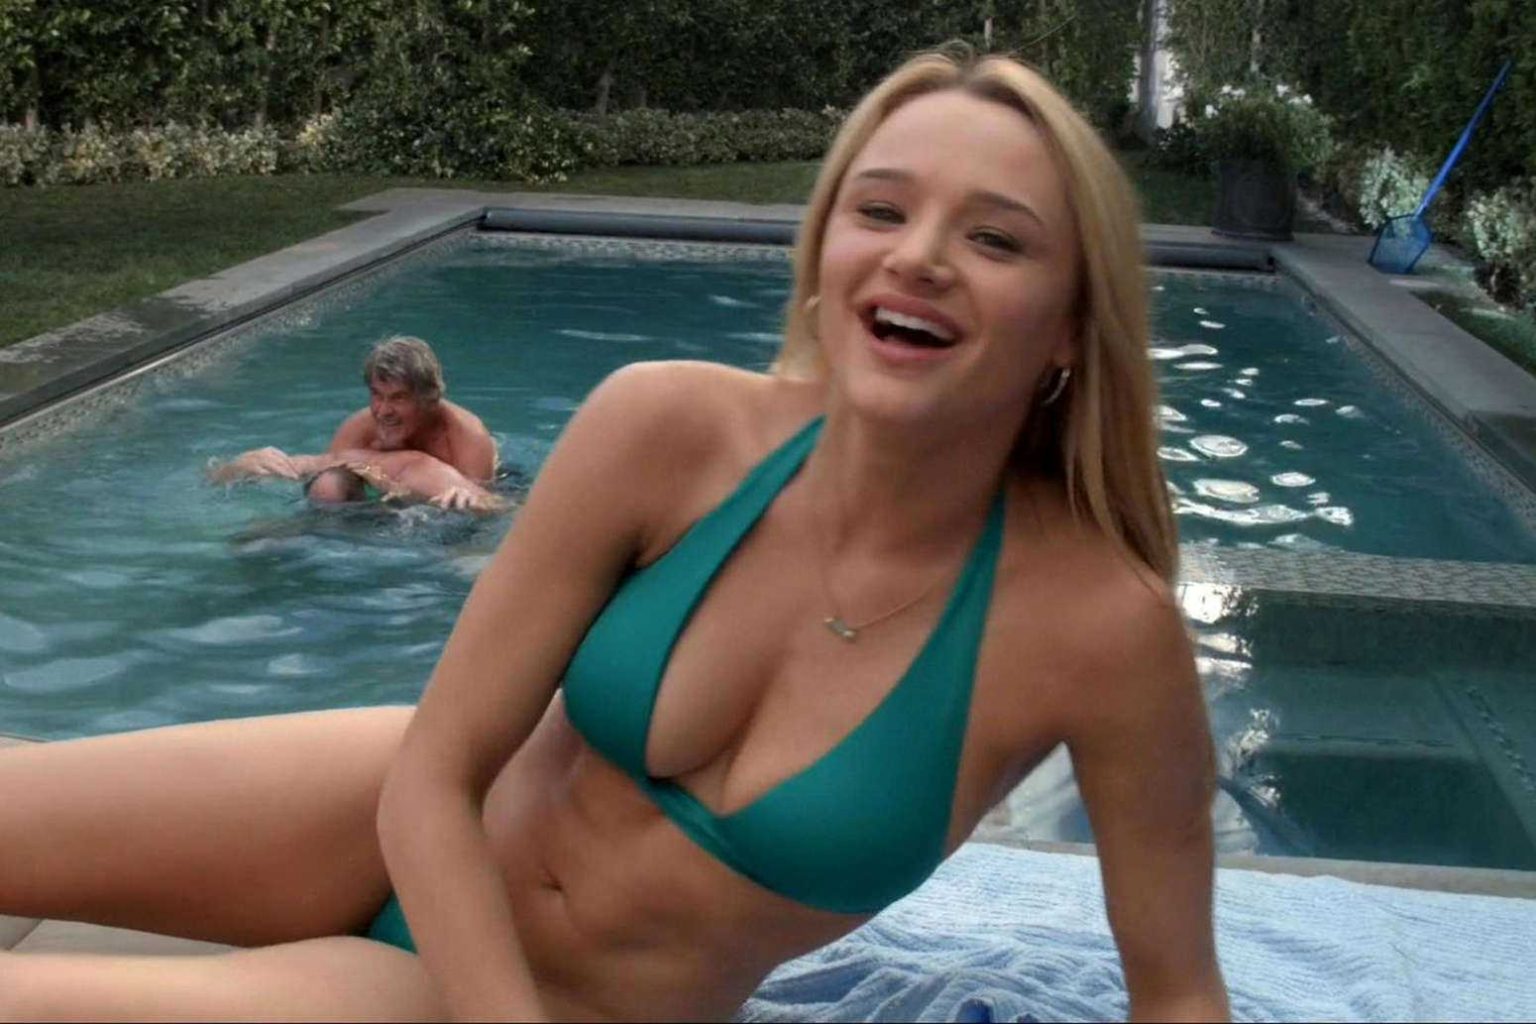 51 Hunter King Nude Pictures Display Her As A Skilled Performer 2